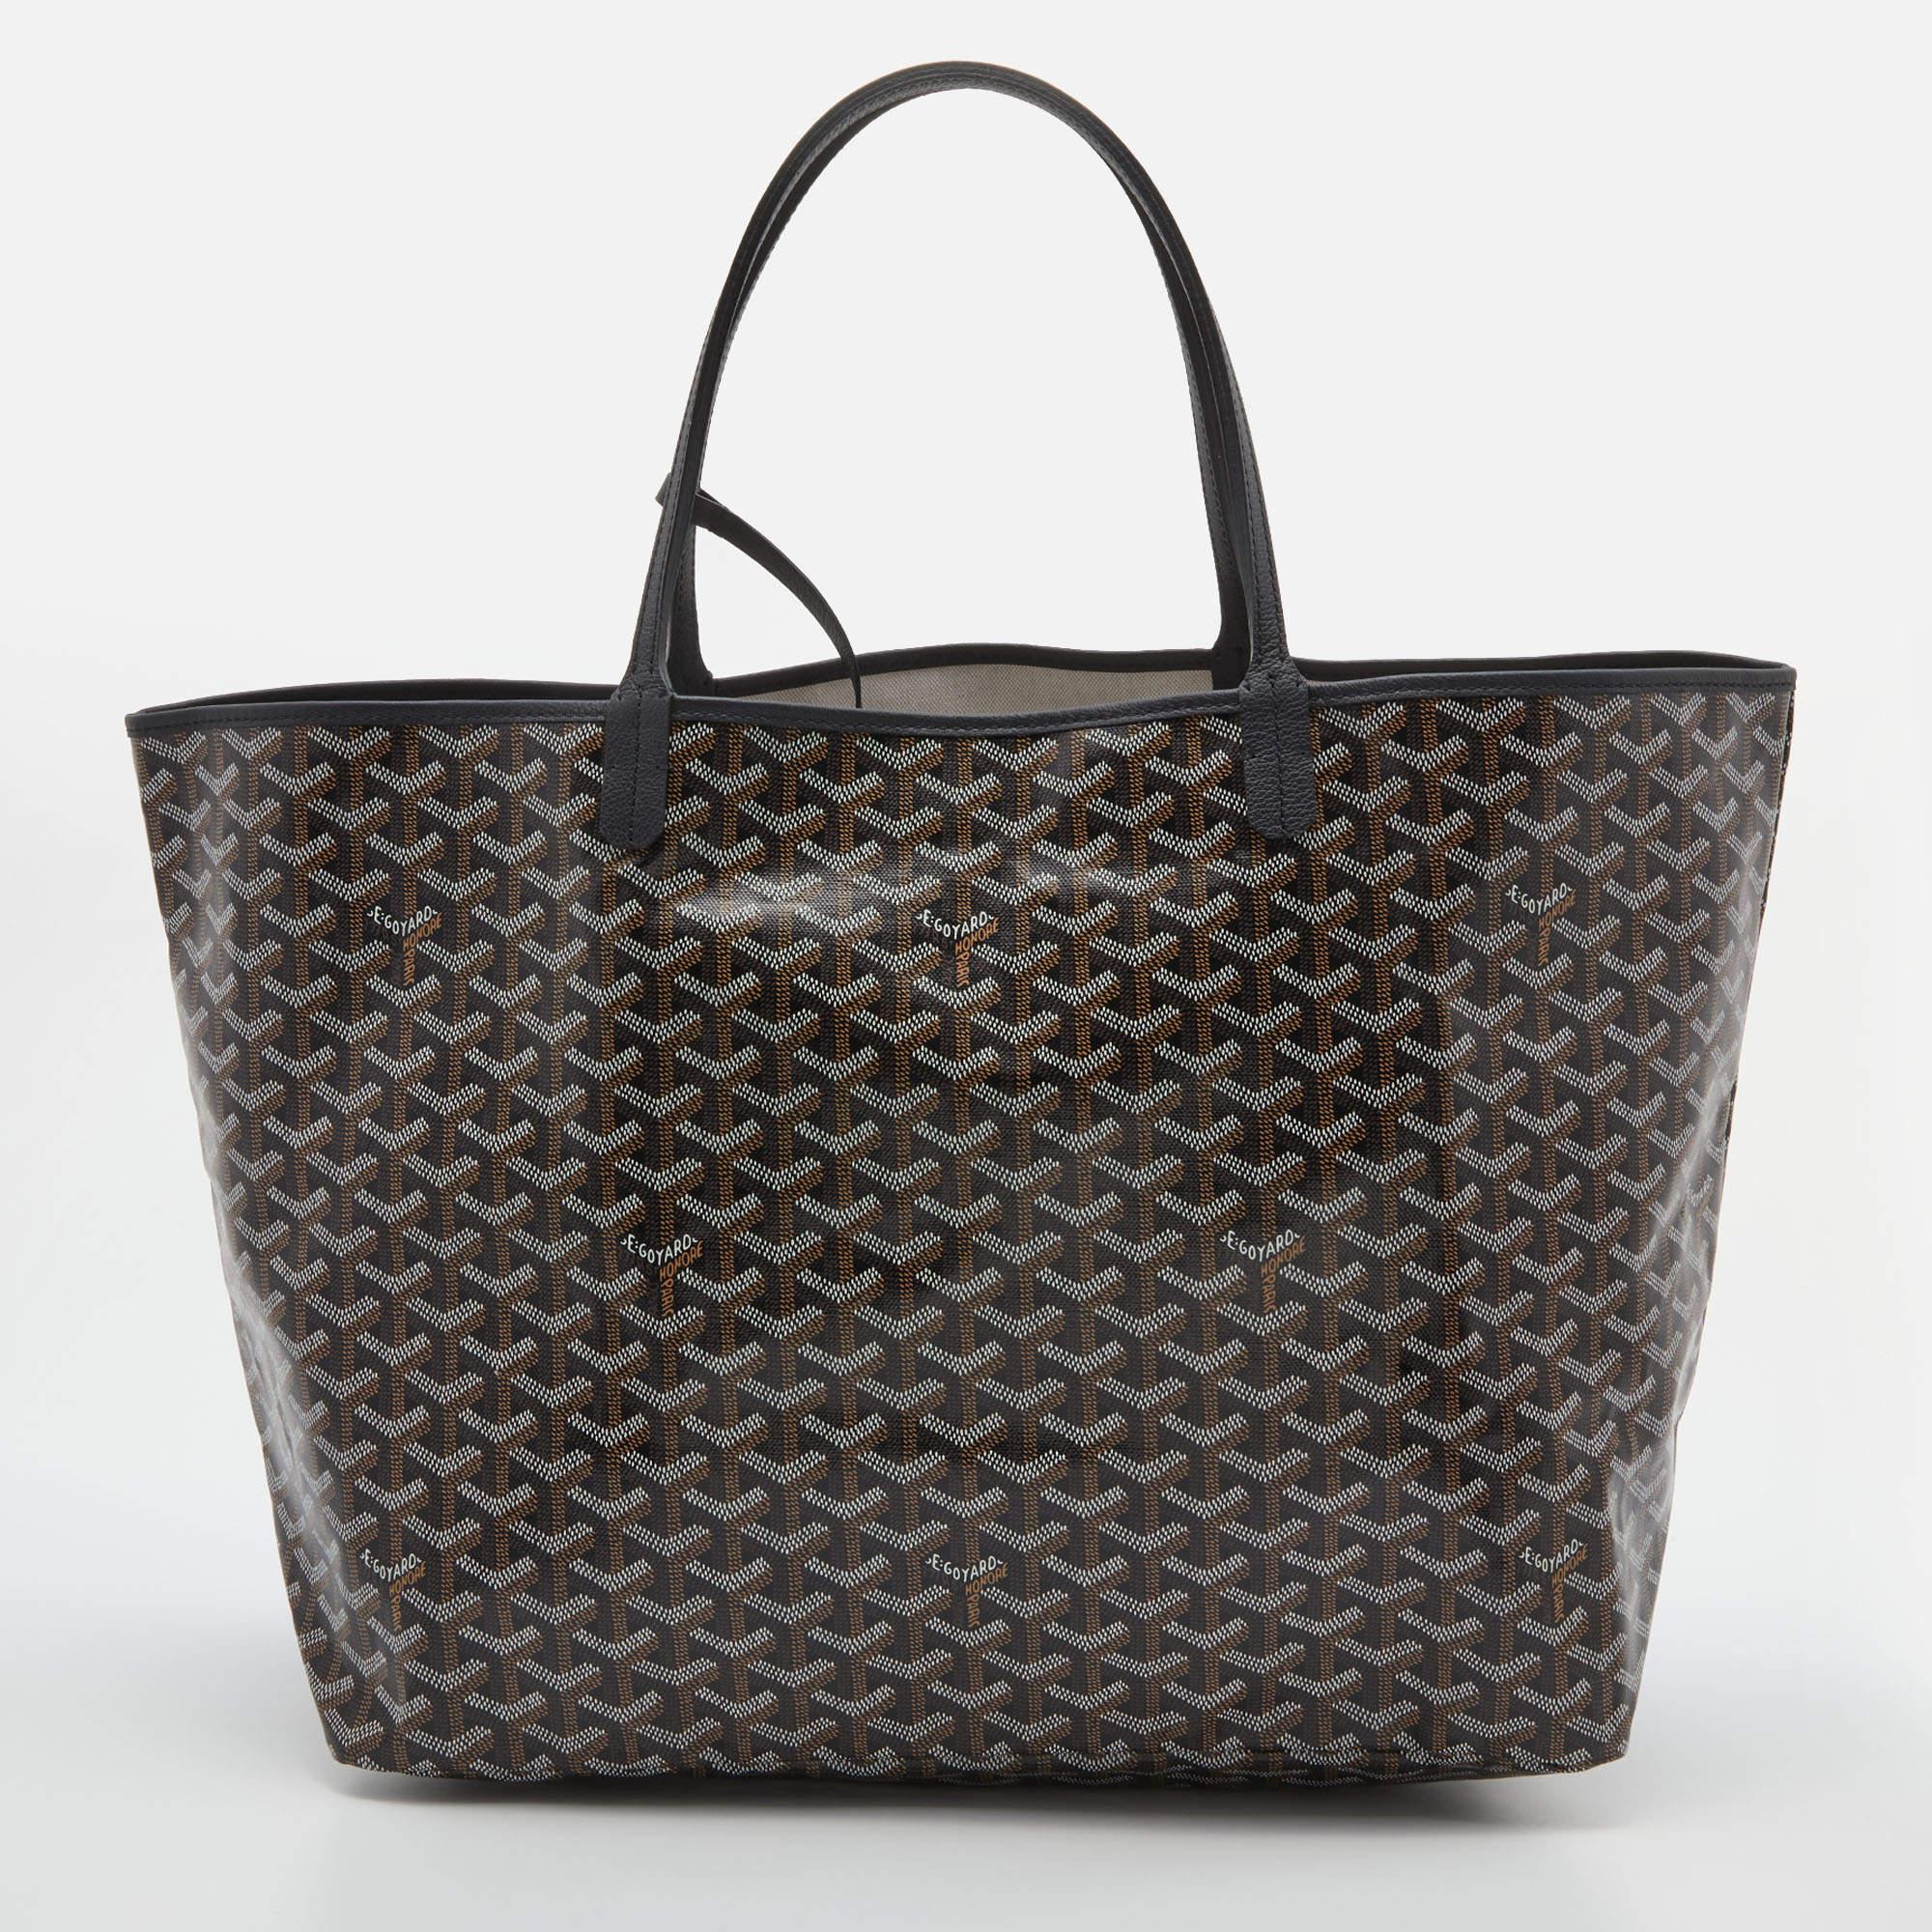 Handbags are more than just instruments to carry one's essentials. They express a woman's sense of style, and the better the bag, the more confidence she gets when she holds it. Goyard brings you one such bag meticulously made from Goyardine canvas